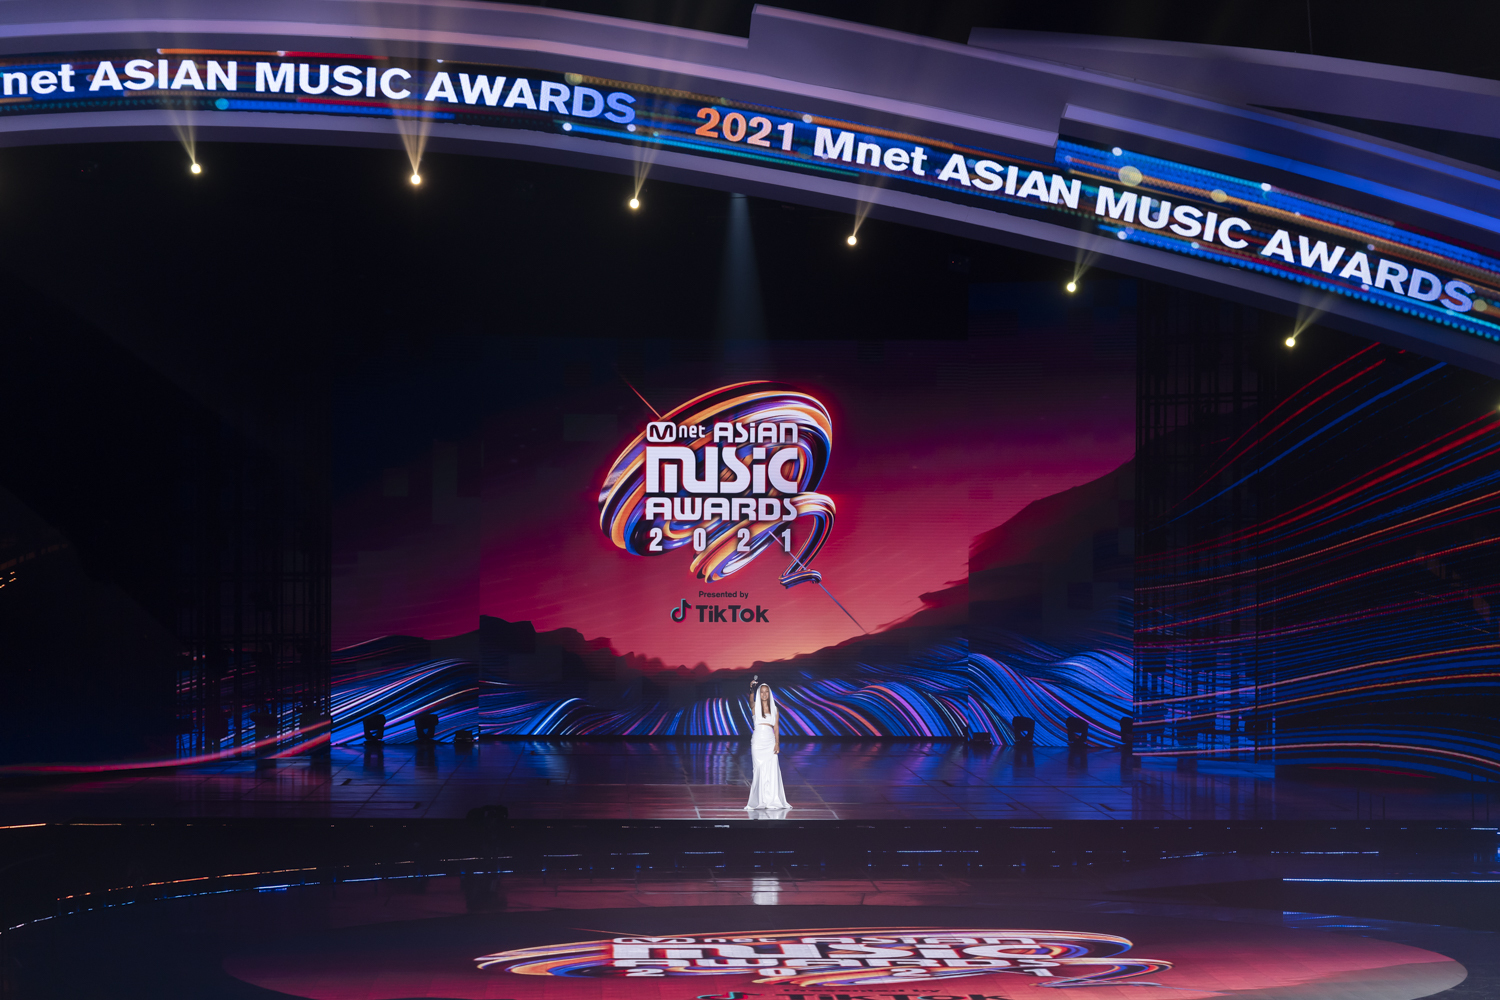 The MAMAs stage in Paju, South Korea where K-pop stars will perform and receive their awards. Photo: Courtesy of CJ ENM